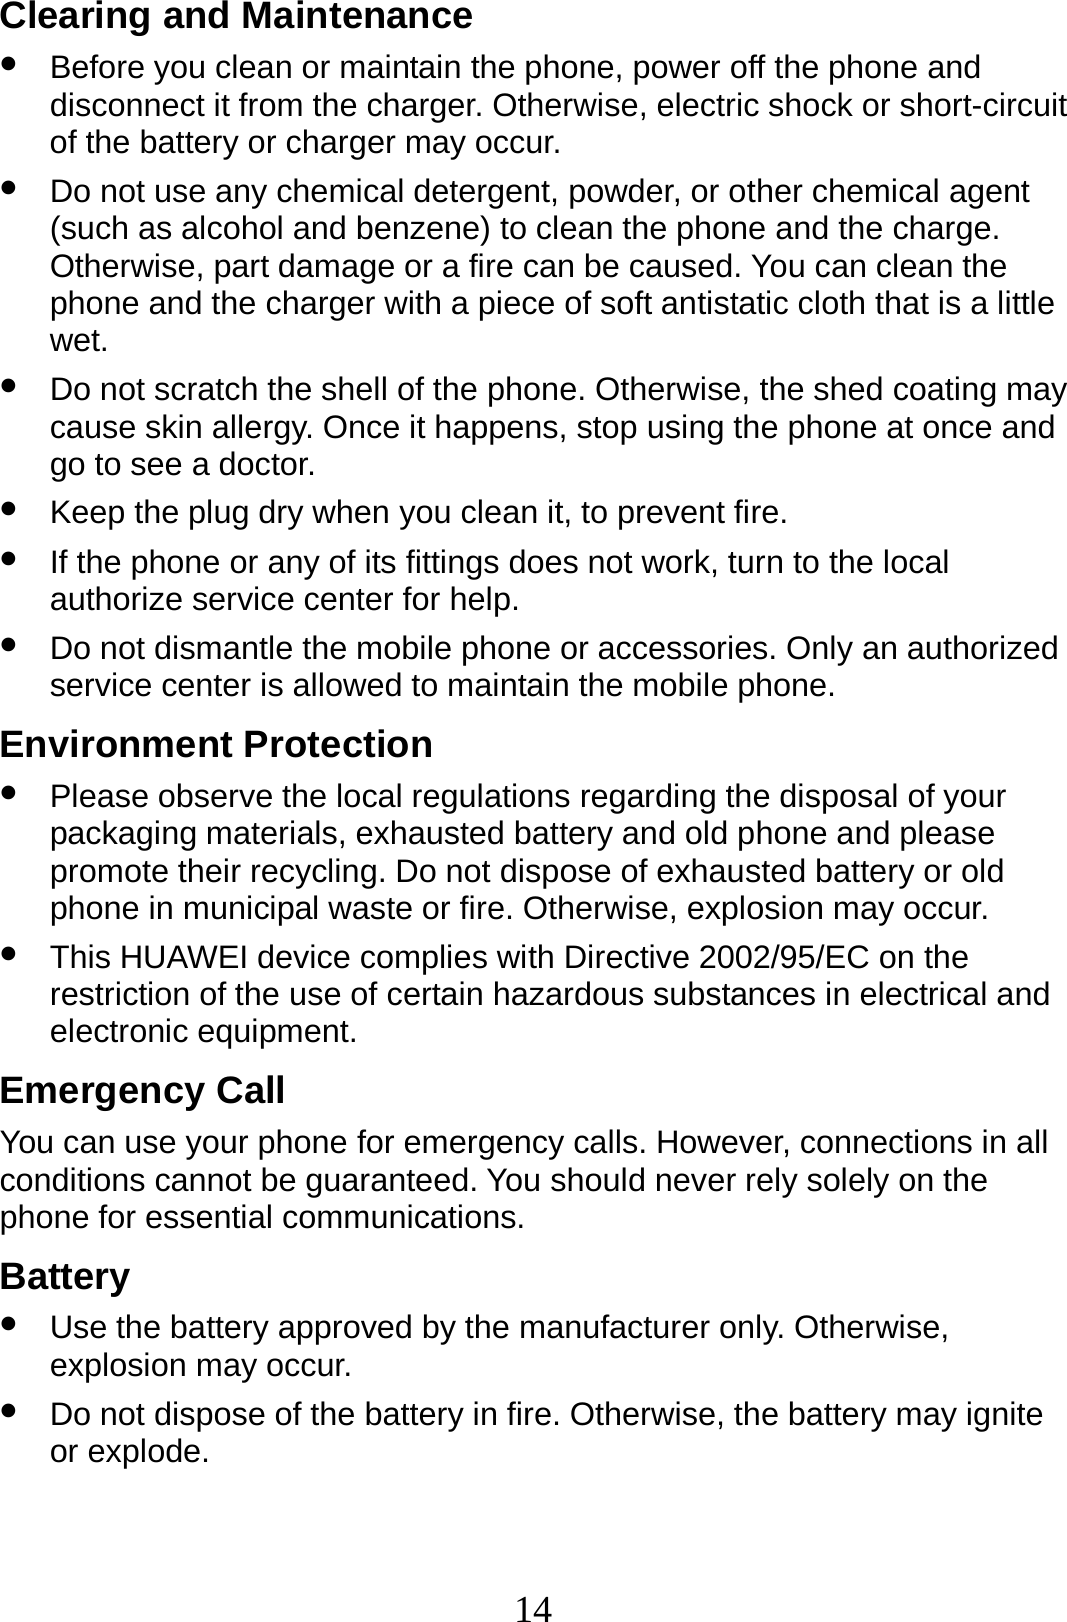 14 Clearing and Maintenance z Before you clean or maintain the phone, power off the phone and disconnect it from the charger. Otherwise, electric shock or short-circuit of the battery or charger may occur. z Do not use any chemical detergent, powder, or other chemical agent (such as alcohol and benzene) to clean the phone and the charge. Otherwise, part damage or a fire can be caused. You can clean the phone and the charger with a piece of soft antistatic cloth that is a little wet. z Do not scratch the shell of the phone. Otherwise, the shed coating may cause skin allergy. Once it happens, stop using the phone at once and go to see a doctor. z Keep the plug dry when you clean it, to prevent fire. z If the phone or any of its fittings does not work, turn to the local authorize service center for help. z Do not dismantle the mobile phone or accessories. Only an authorized service center is allowed to maintain the mobile phone. Environment Protection z Please observe the local regulations regarding the disposal of your packaging materials, exhausted battery and old phone and please promote their recycling. Do not dispose of exhausted battery or old phone in municipal waste or fire. Otherwise, explosion may occur. z This HUAWEI device complies with Directive 2002/95/EC on the restriction of the use of certain hazardous substances in electrical and electronic equipment. Emergency Call You can use your phone for emergency calls. However, connections in all conditions cannot be guaranteed. You should never rely solely on the phone for essential communications. Battery z Use the battery approved by the manufacturer only. Otherwise, explosion may occur. z Do not dispose of the battery in fire. Otherwise, the battery may ignite or explode. 